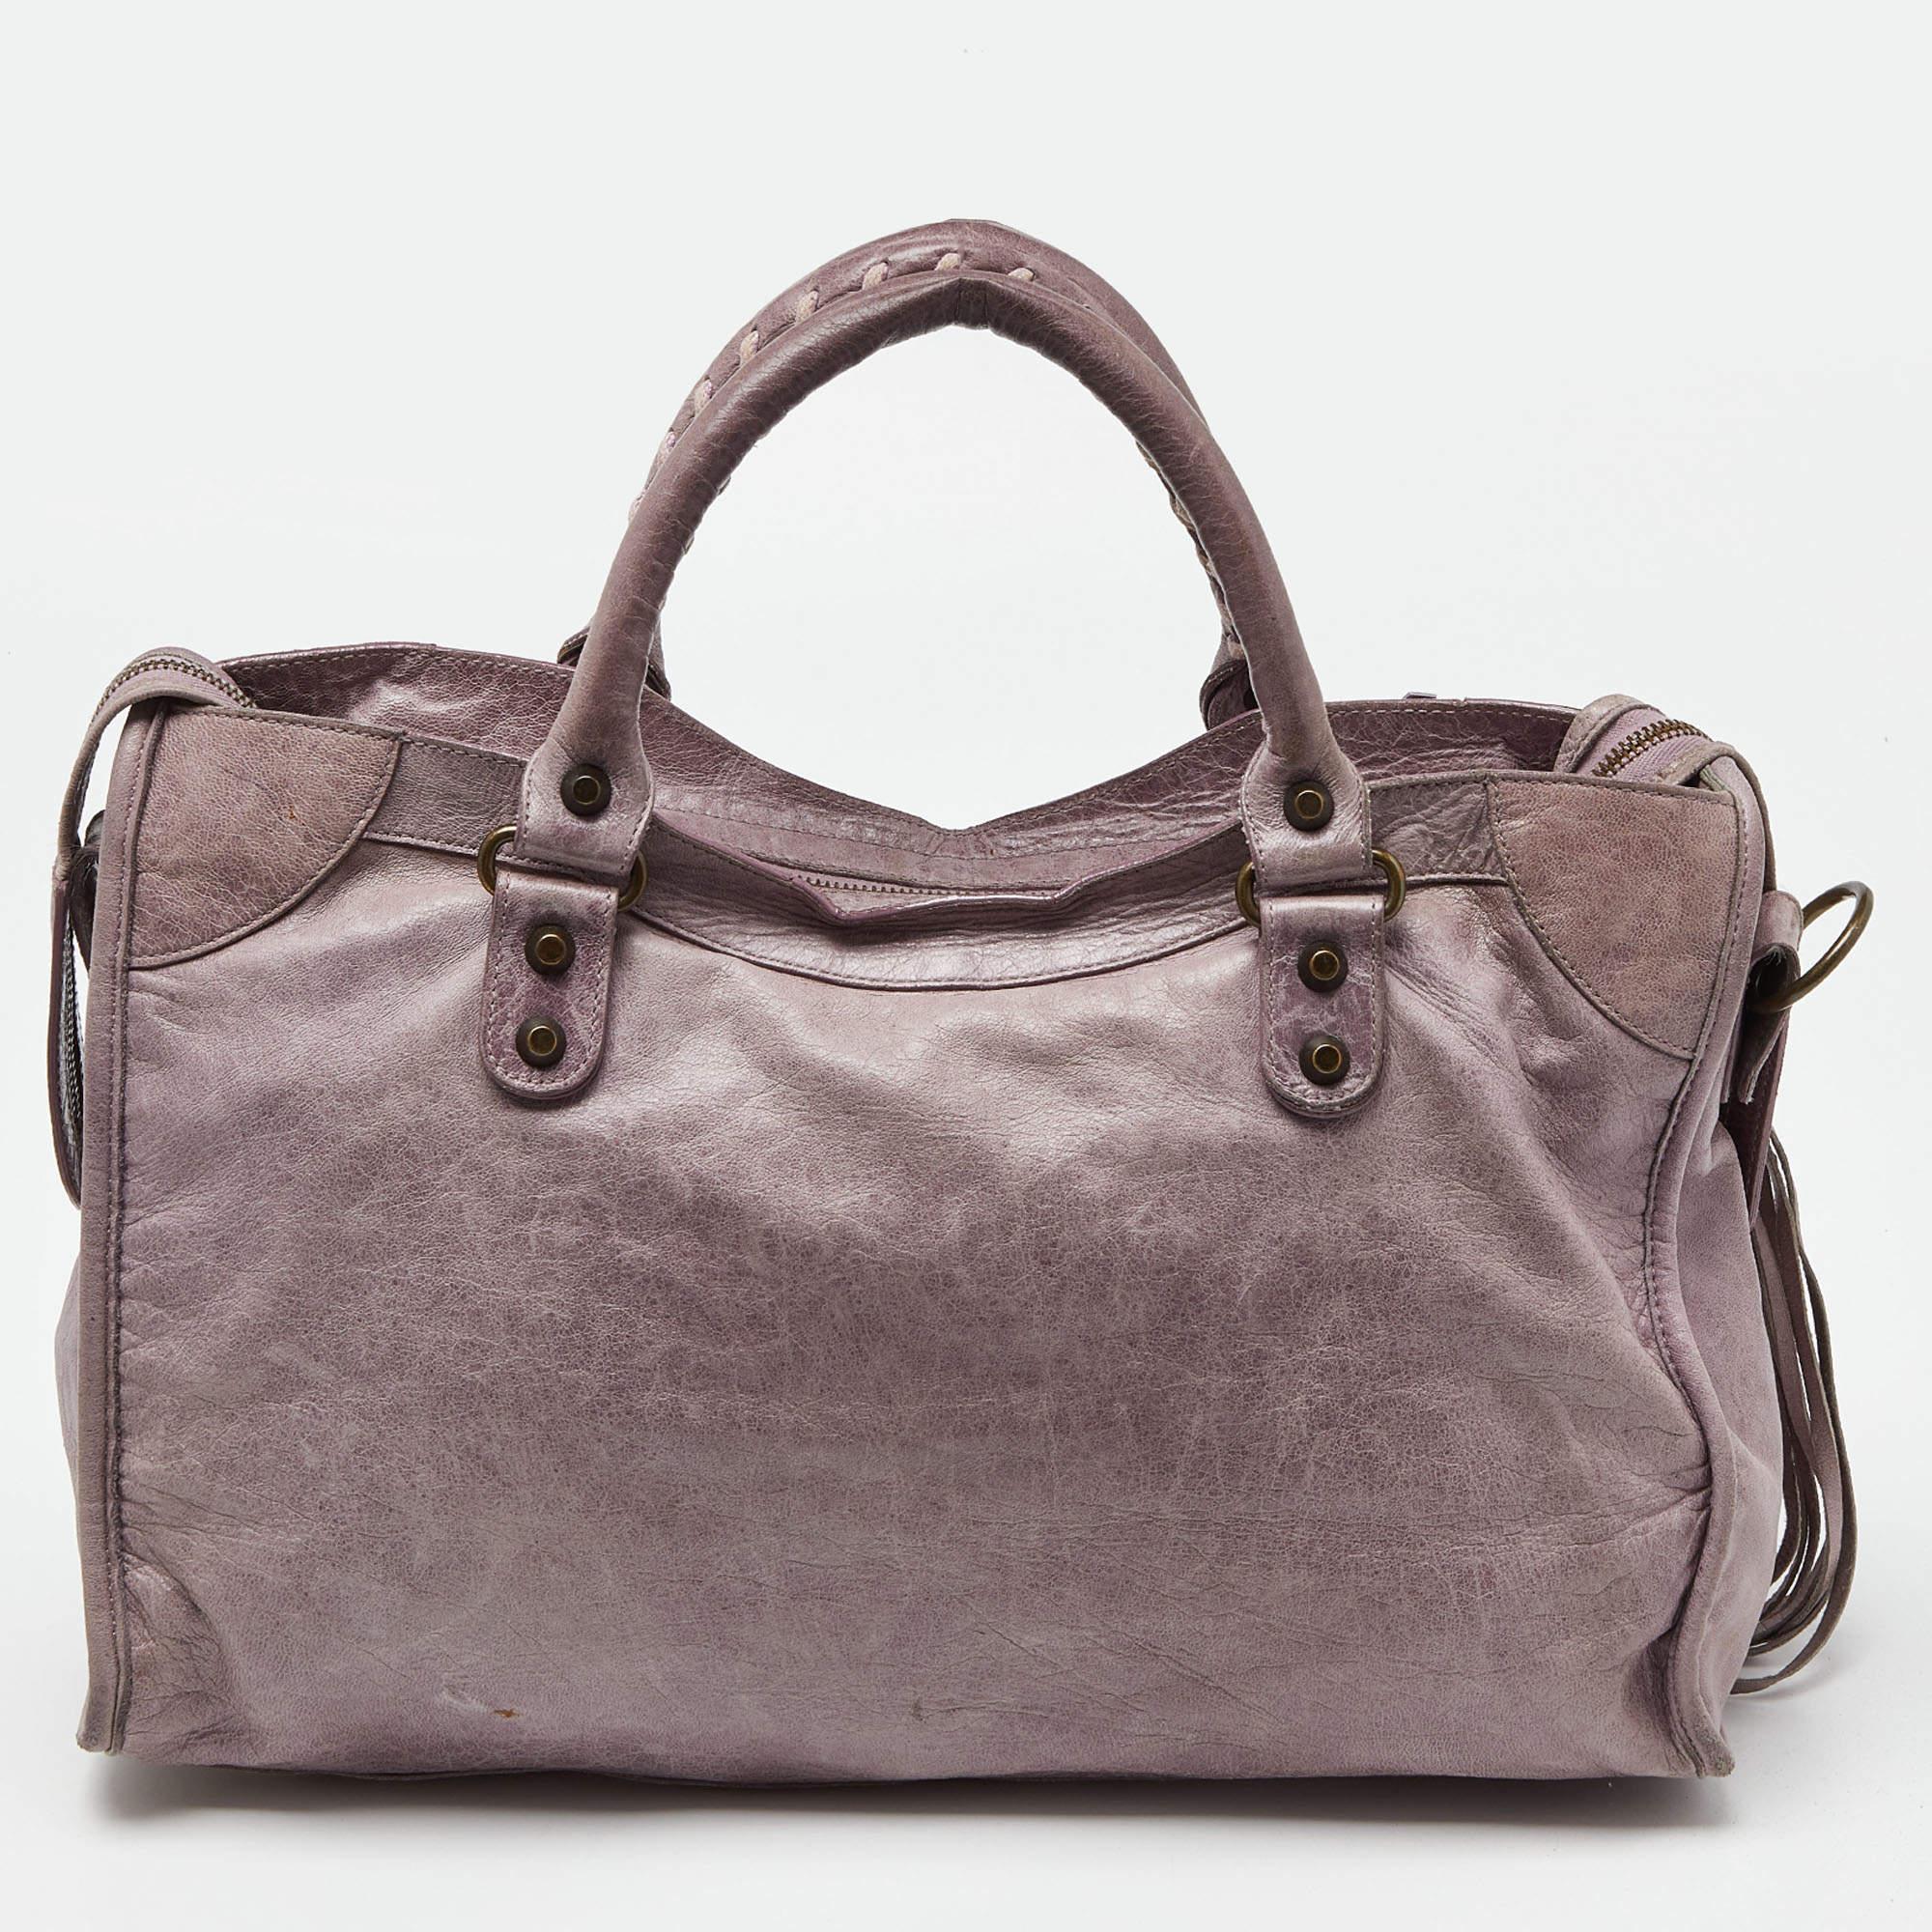 The lilac exterior of this Balenciaga City bag is made chic and highly fashionable with brass-tone accents. Crafted from leather, it is equipped with a front zipper pocket and can be carried with dual handles. The fabric-lined interior is perfectly